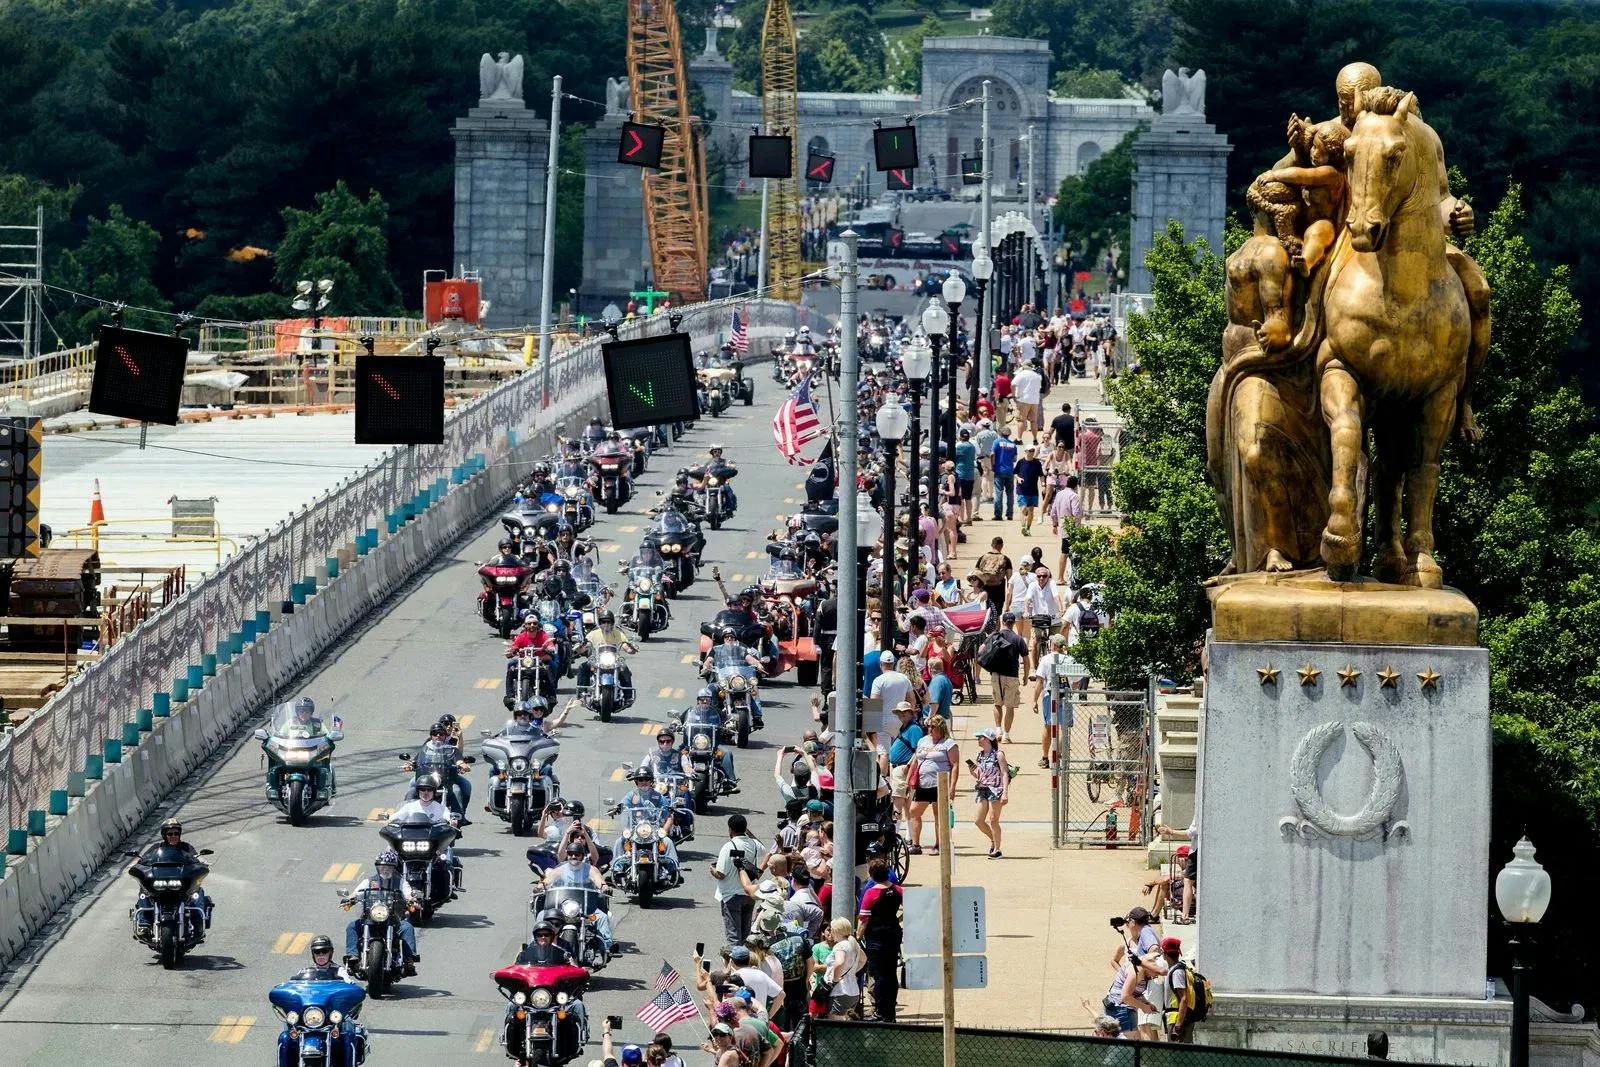 Explore Washington DC with a Harley Davidson or your favorite Honda or scooter